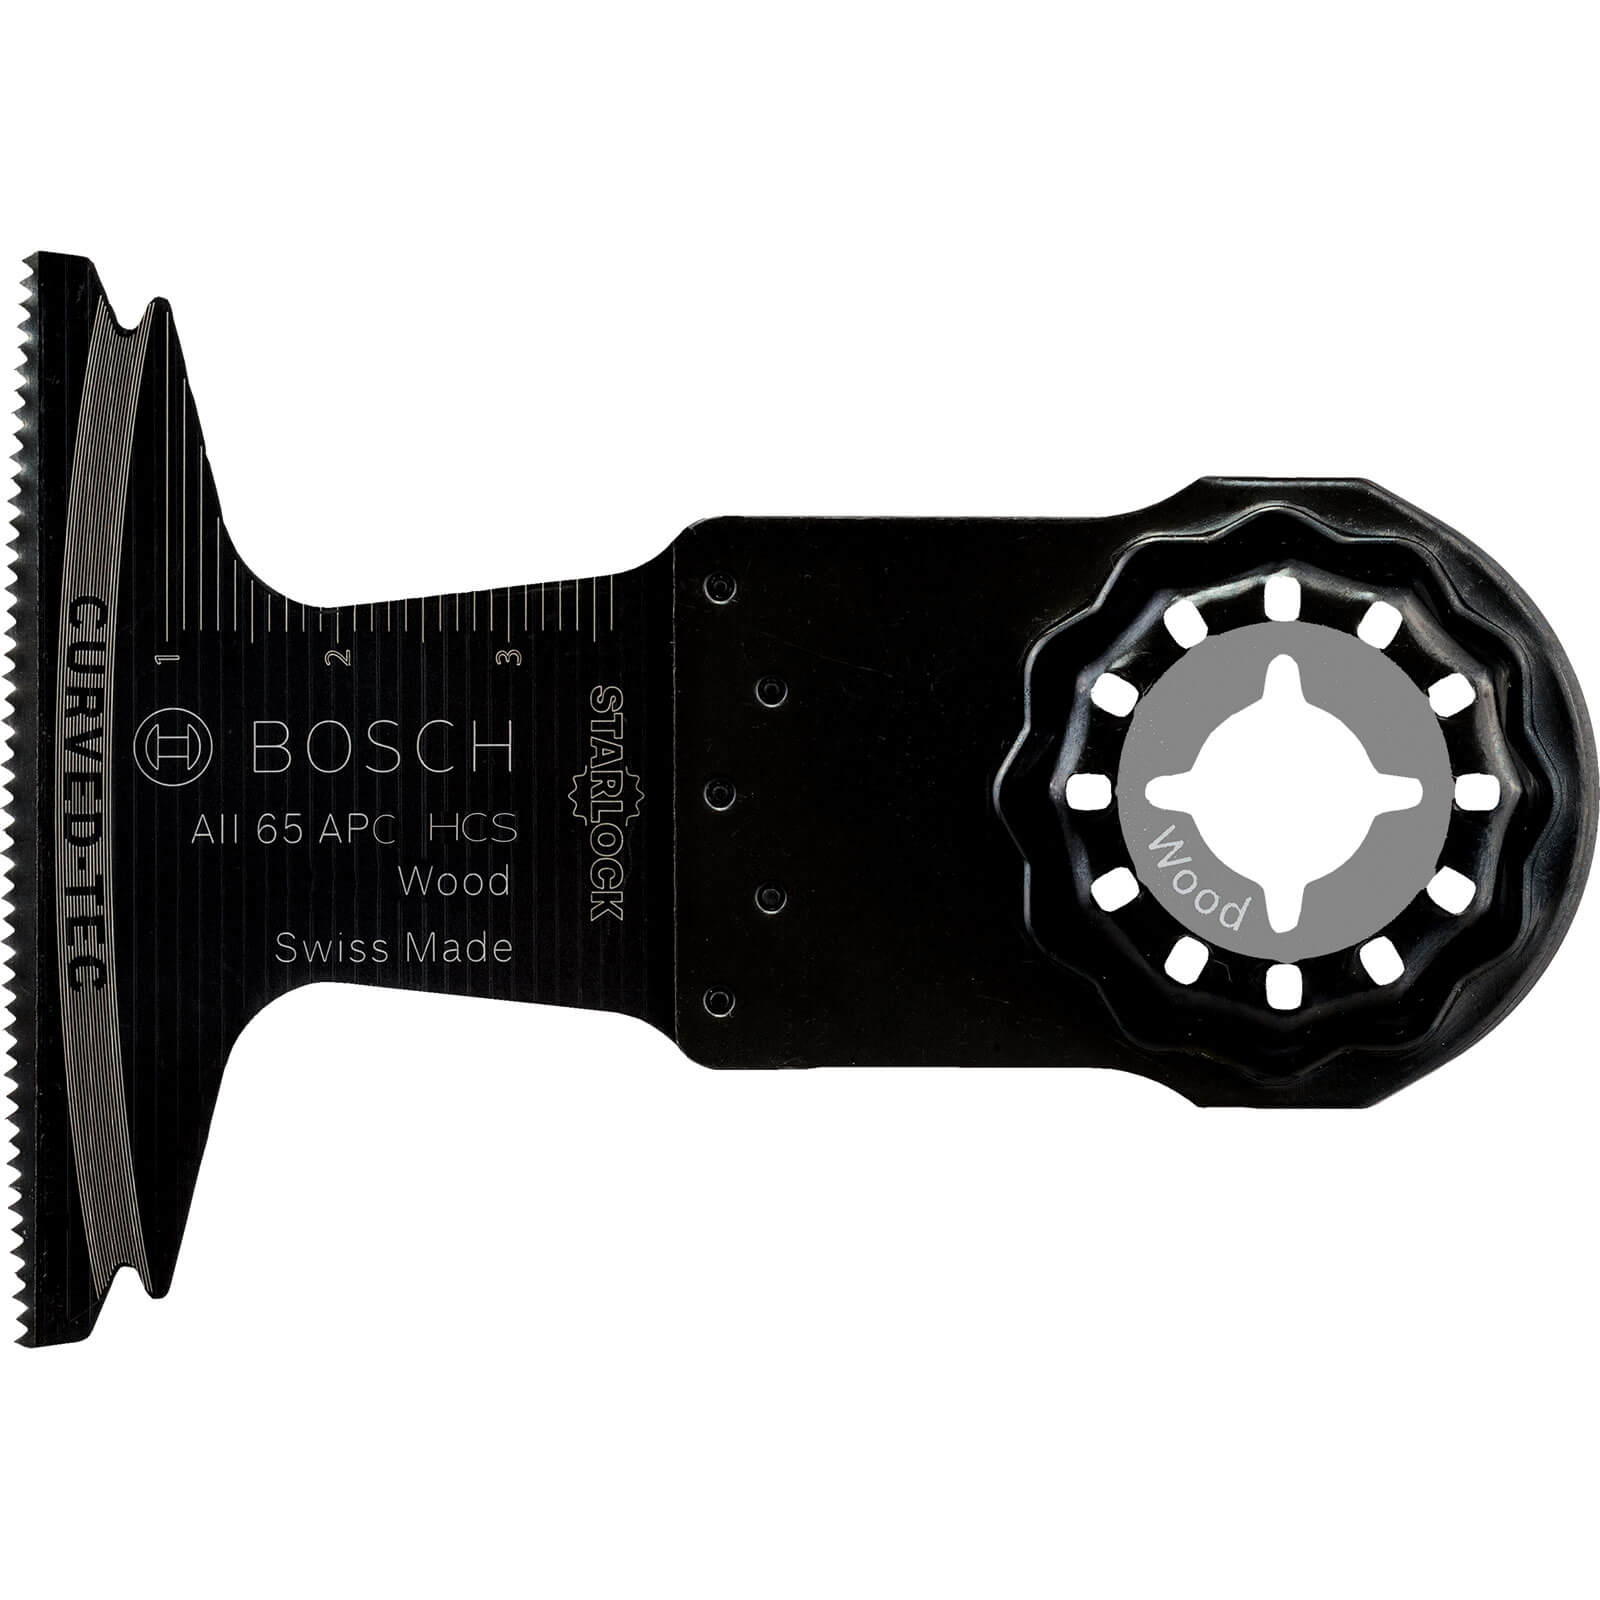 Image of Bosch All 65 APC Wood HCS Starlock Oscillating Multi Tool Plunge Saw Blade 65mm Pack of 5